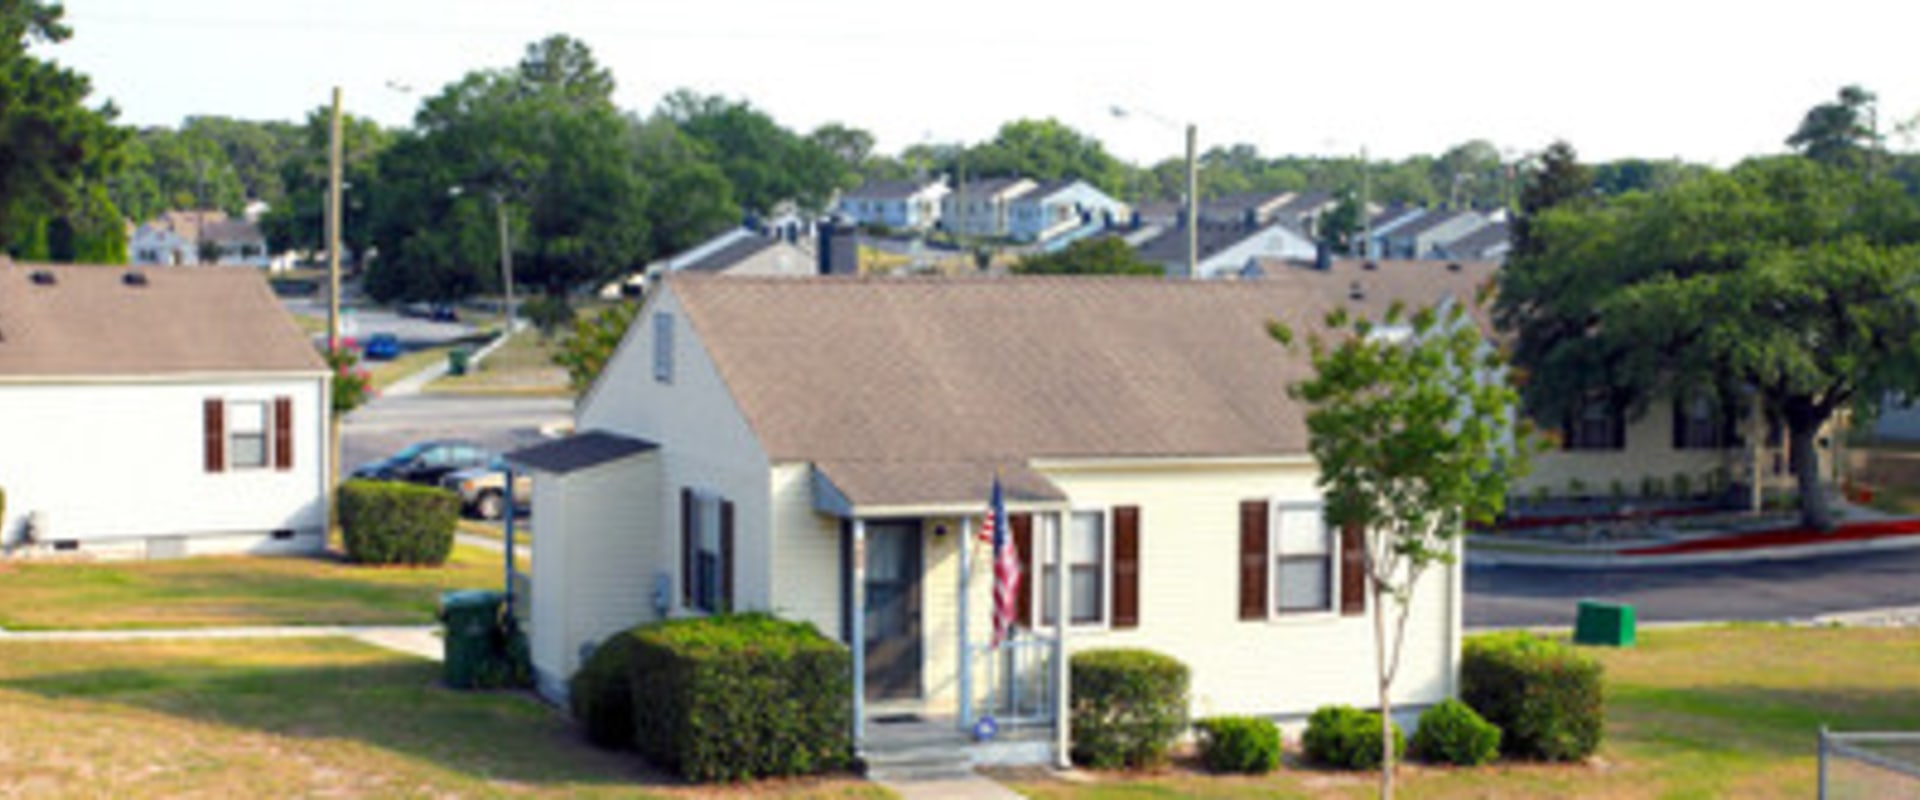 Tips For Investing In A Multi-Family Property In Wilmington, NC